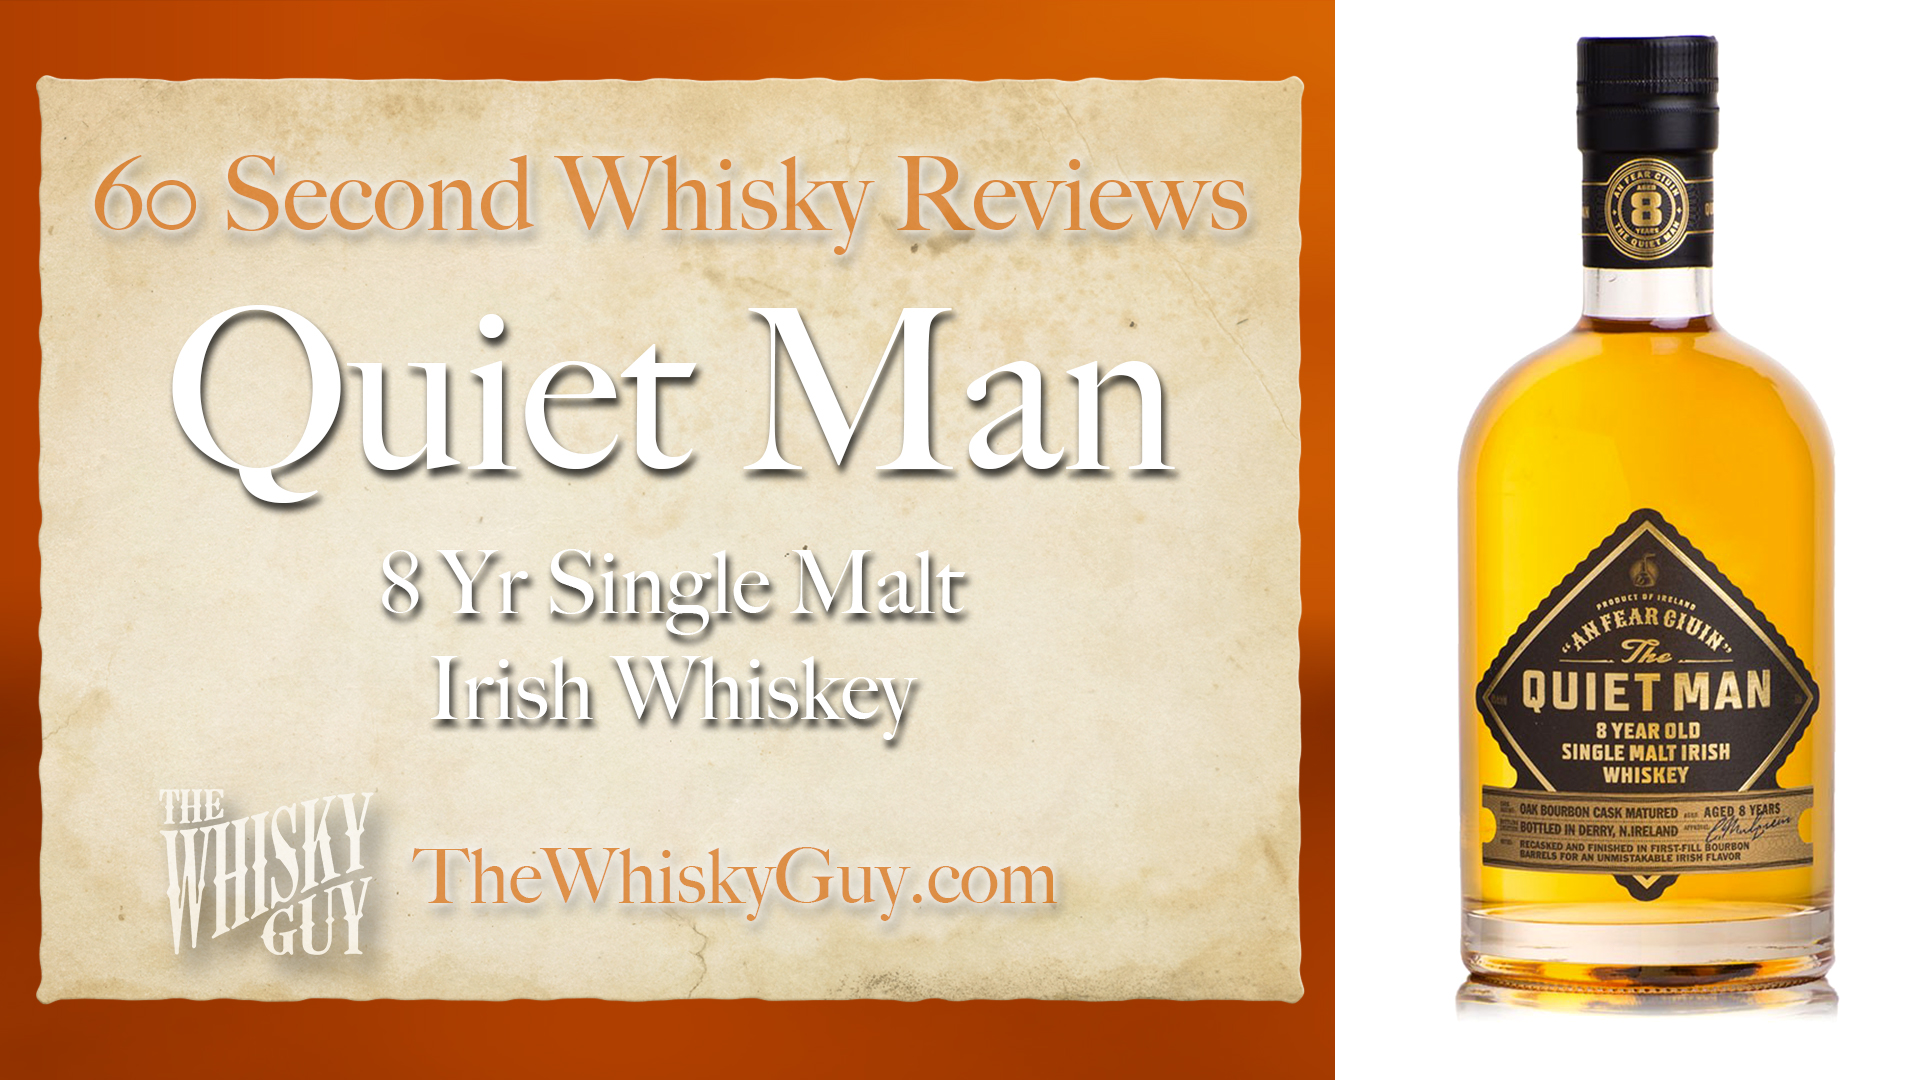 Does The Quiet Man 8 year Single Malt Irish Whiskey belong in your liquor cabinet? Is it worth the price at the bar? Give The Whisky Guy 60 seconds and find out! In just 60 seconds, The Whisky Guy reviews Irish Whiskey, Scotch Whisky, Single Malt, Canadian Whisky, Bourbon Whiskey, Japanese Whisky and other whiskies from around the world. Find more at TheWhiskyGuy.com. All original content © Ari Shapiro - TheWhiskyGuy.com